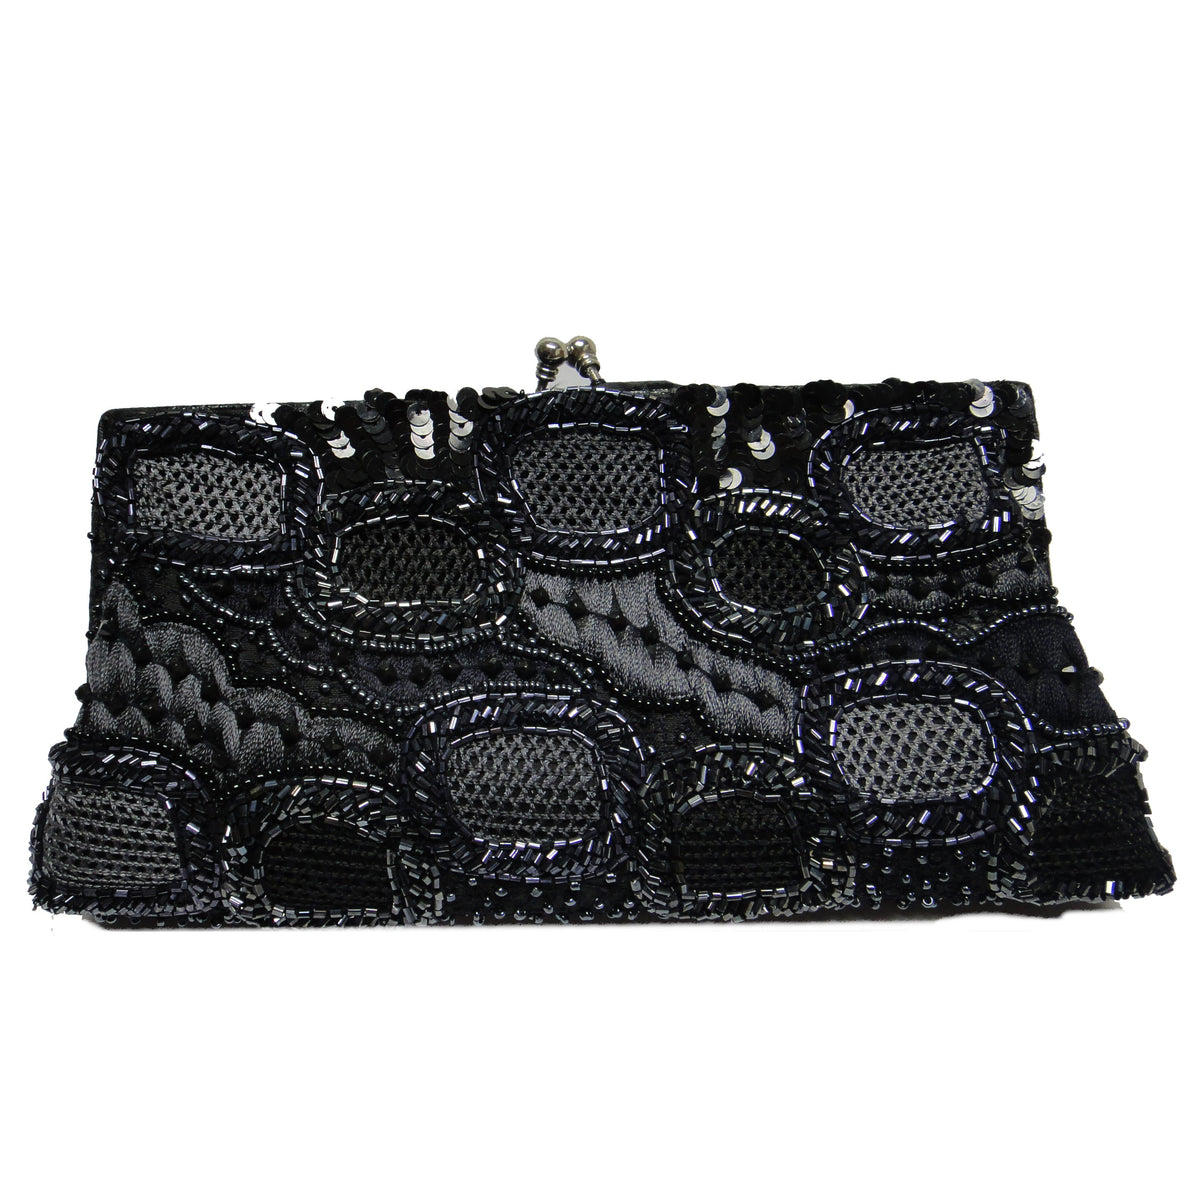 Silk Embroidered Black Beaded Clutch